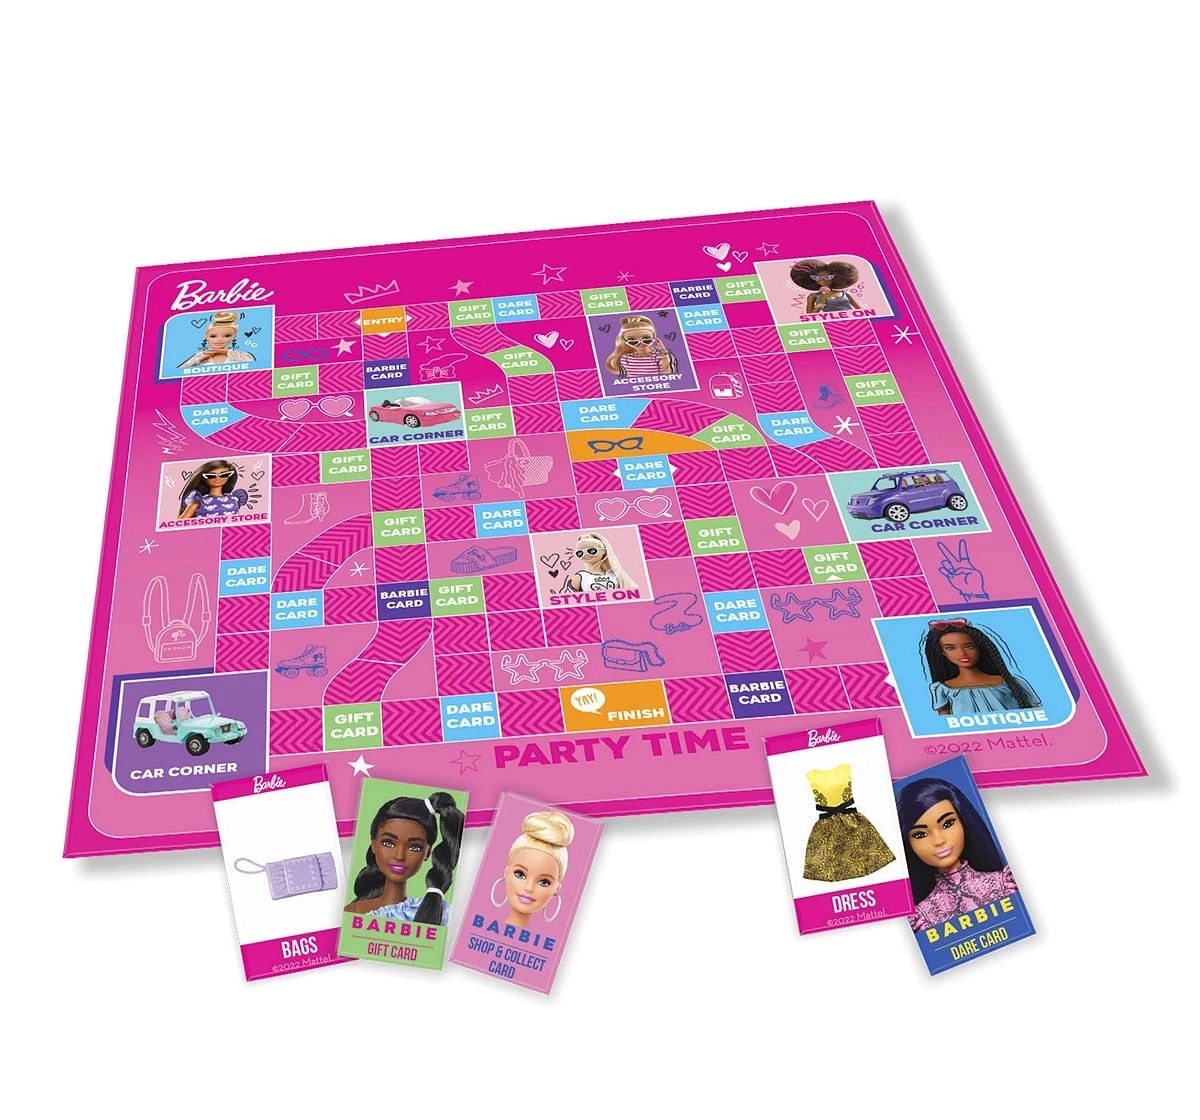 Dress It Up by Barbie Board Game for Kids Age 7 Years +, 2-4 Players, Multicolour